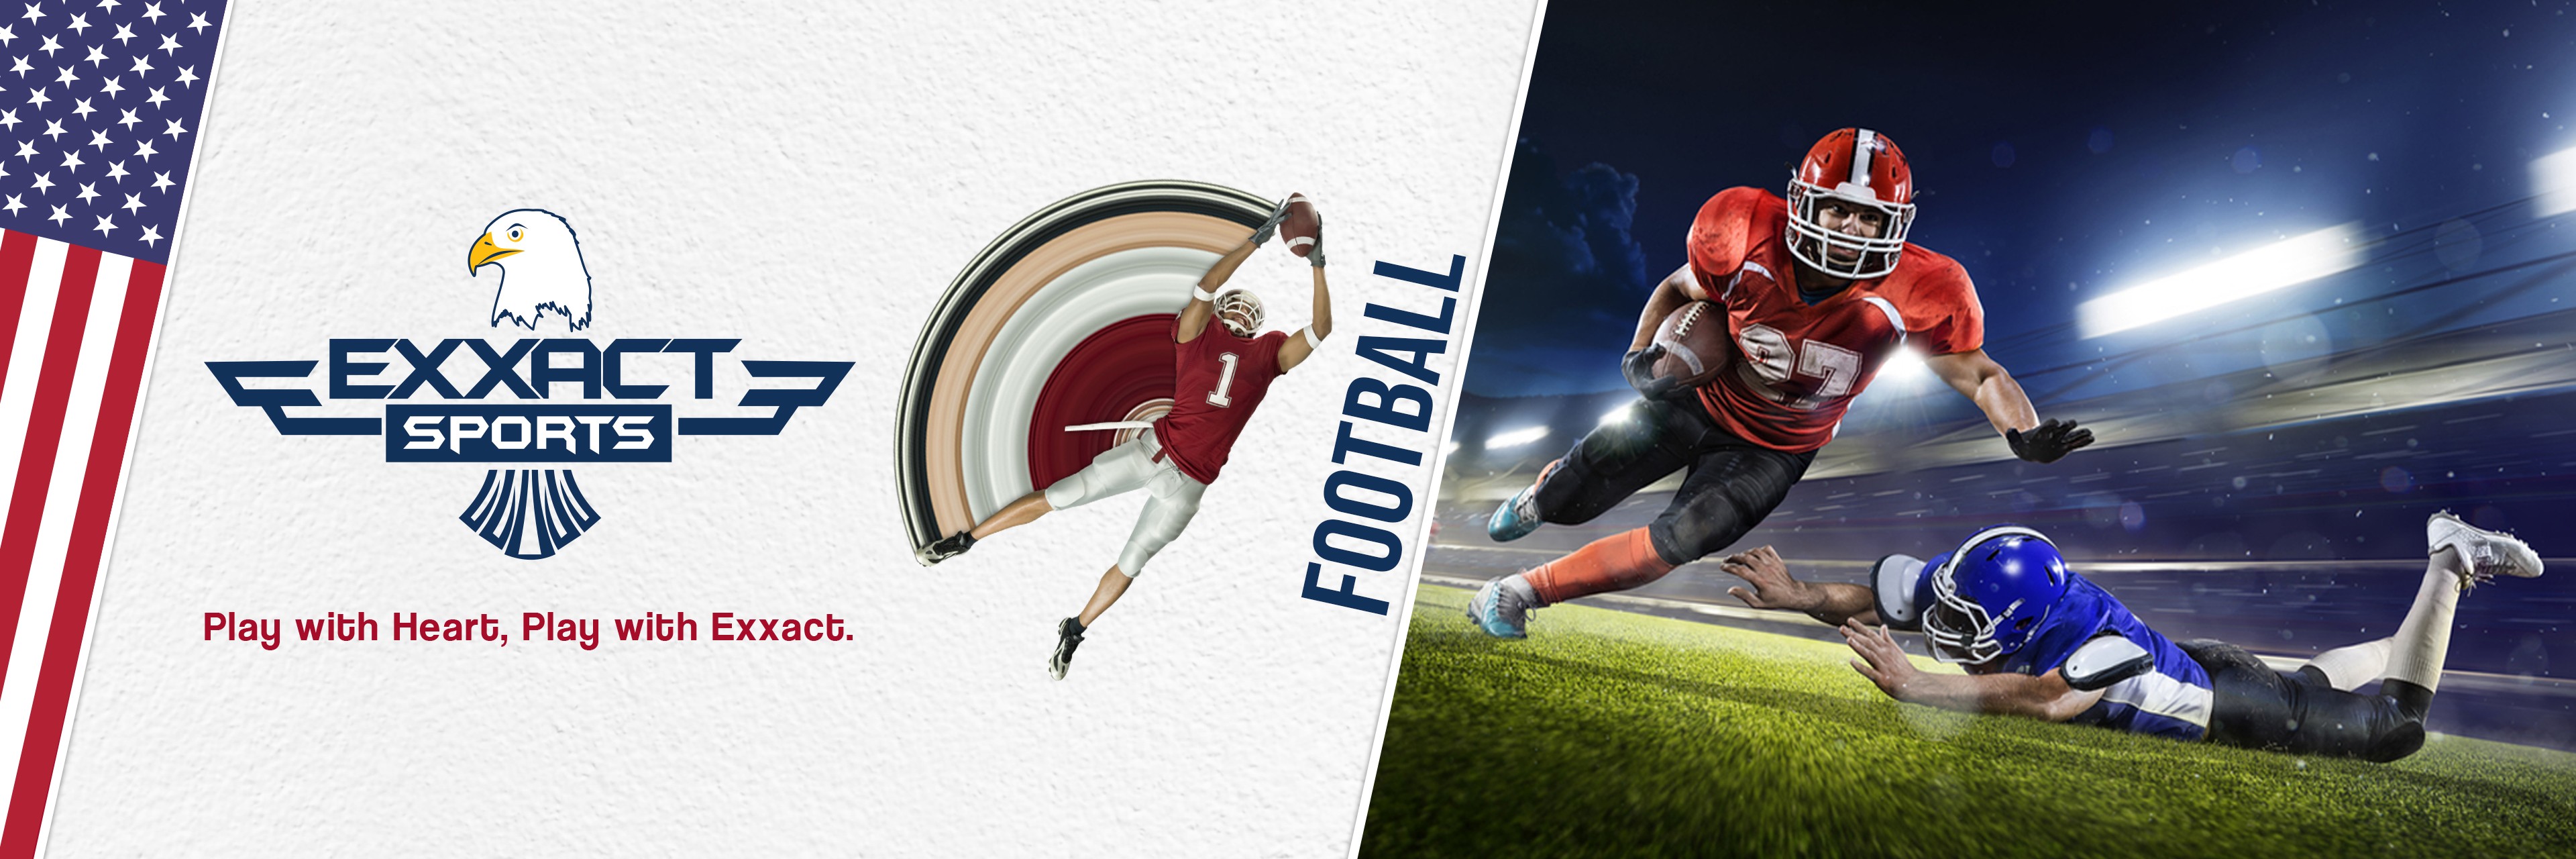 Premium Football Shorts & Gear for Every Player